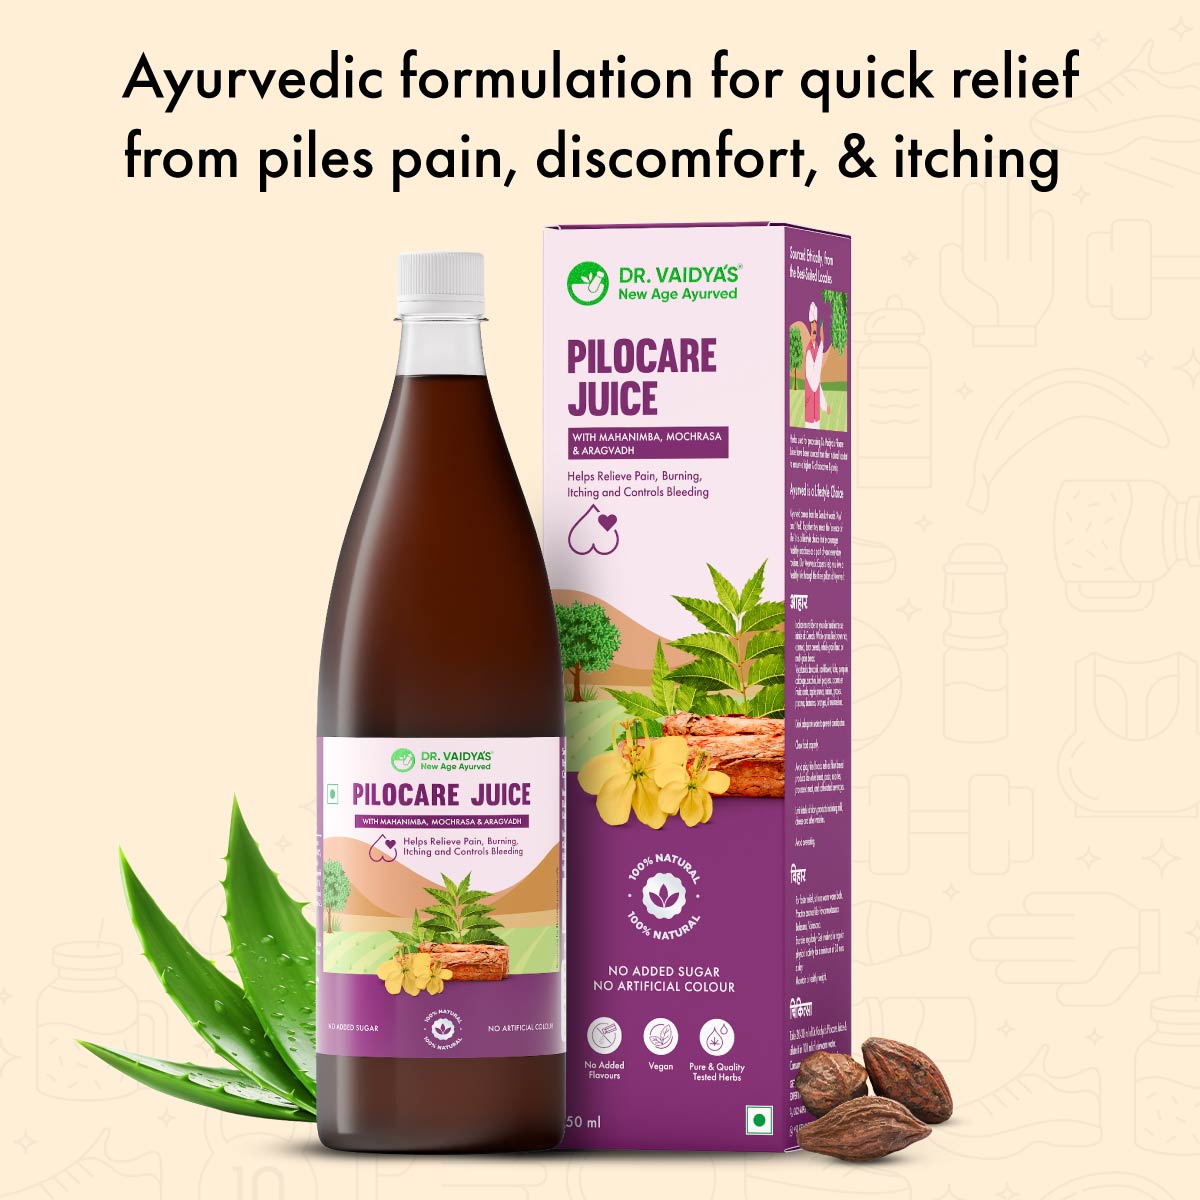 Dr. Vaidya’s Pilocare Juice - Ayurvedic & Natural Relief from Piles Pain, Swelling, Burning, & Itching